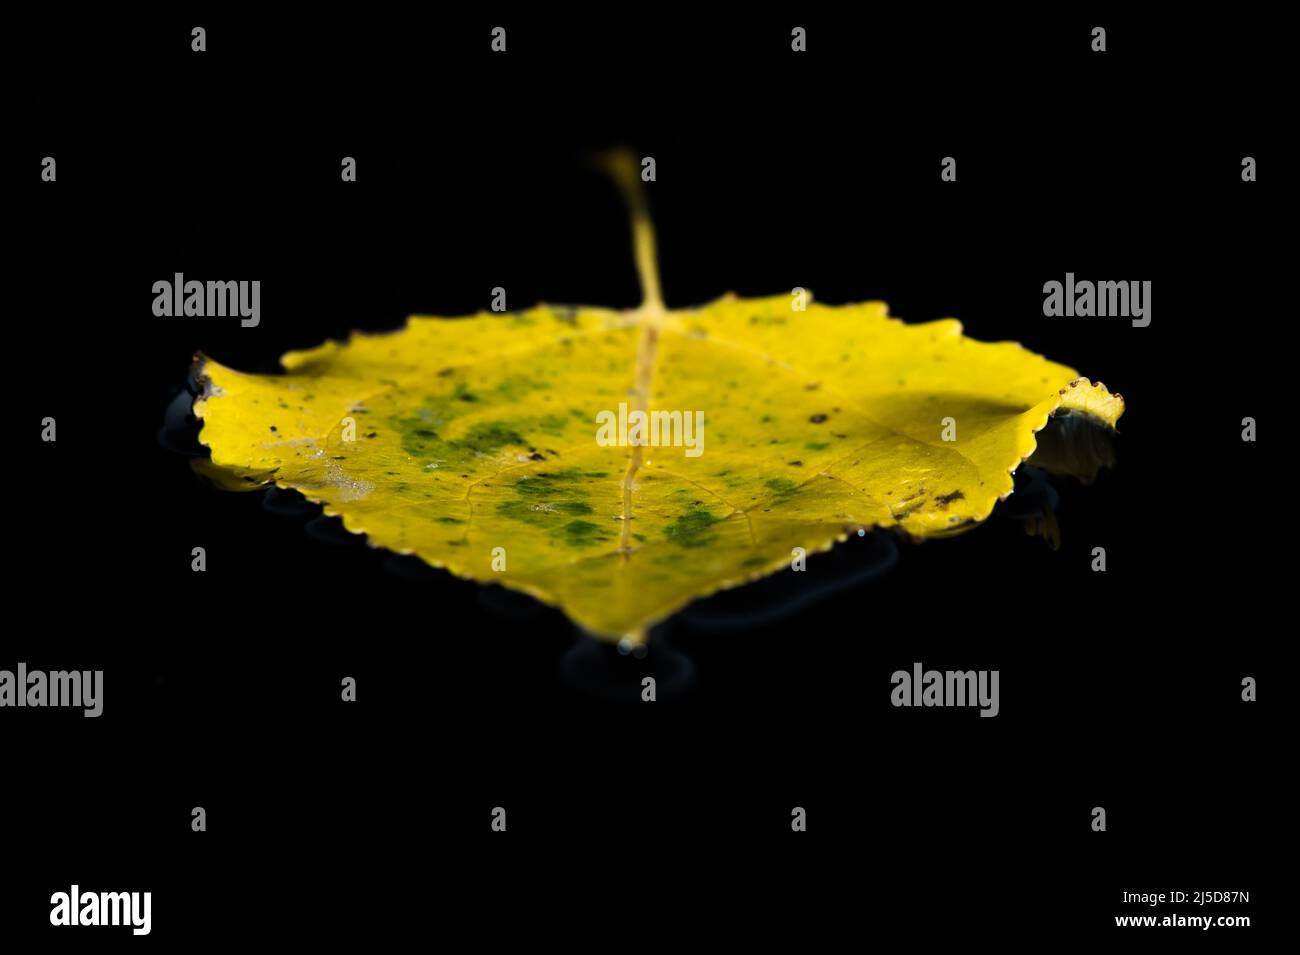 A beautiful picture of a leaf on a black background Stock Photo